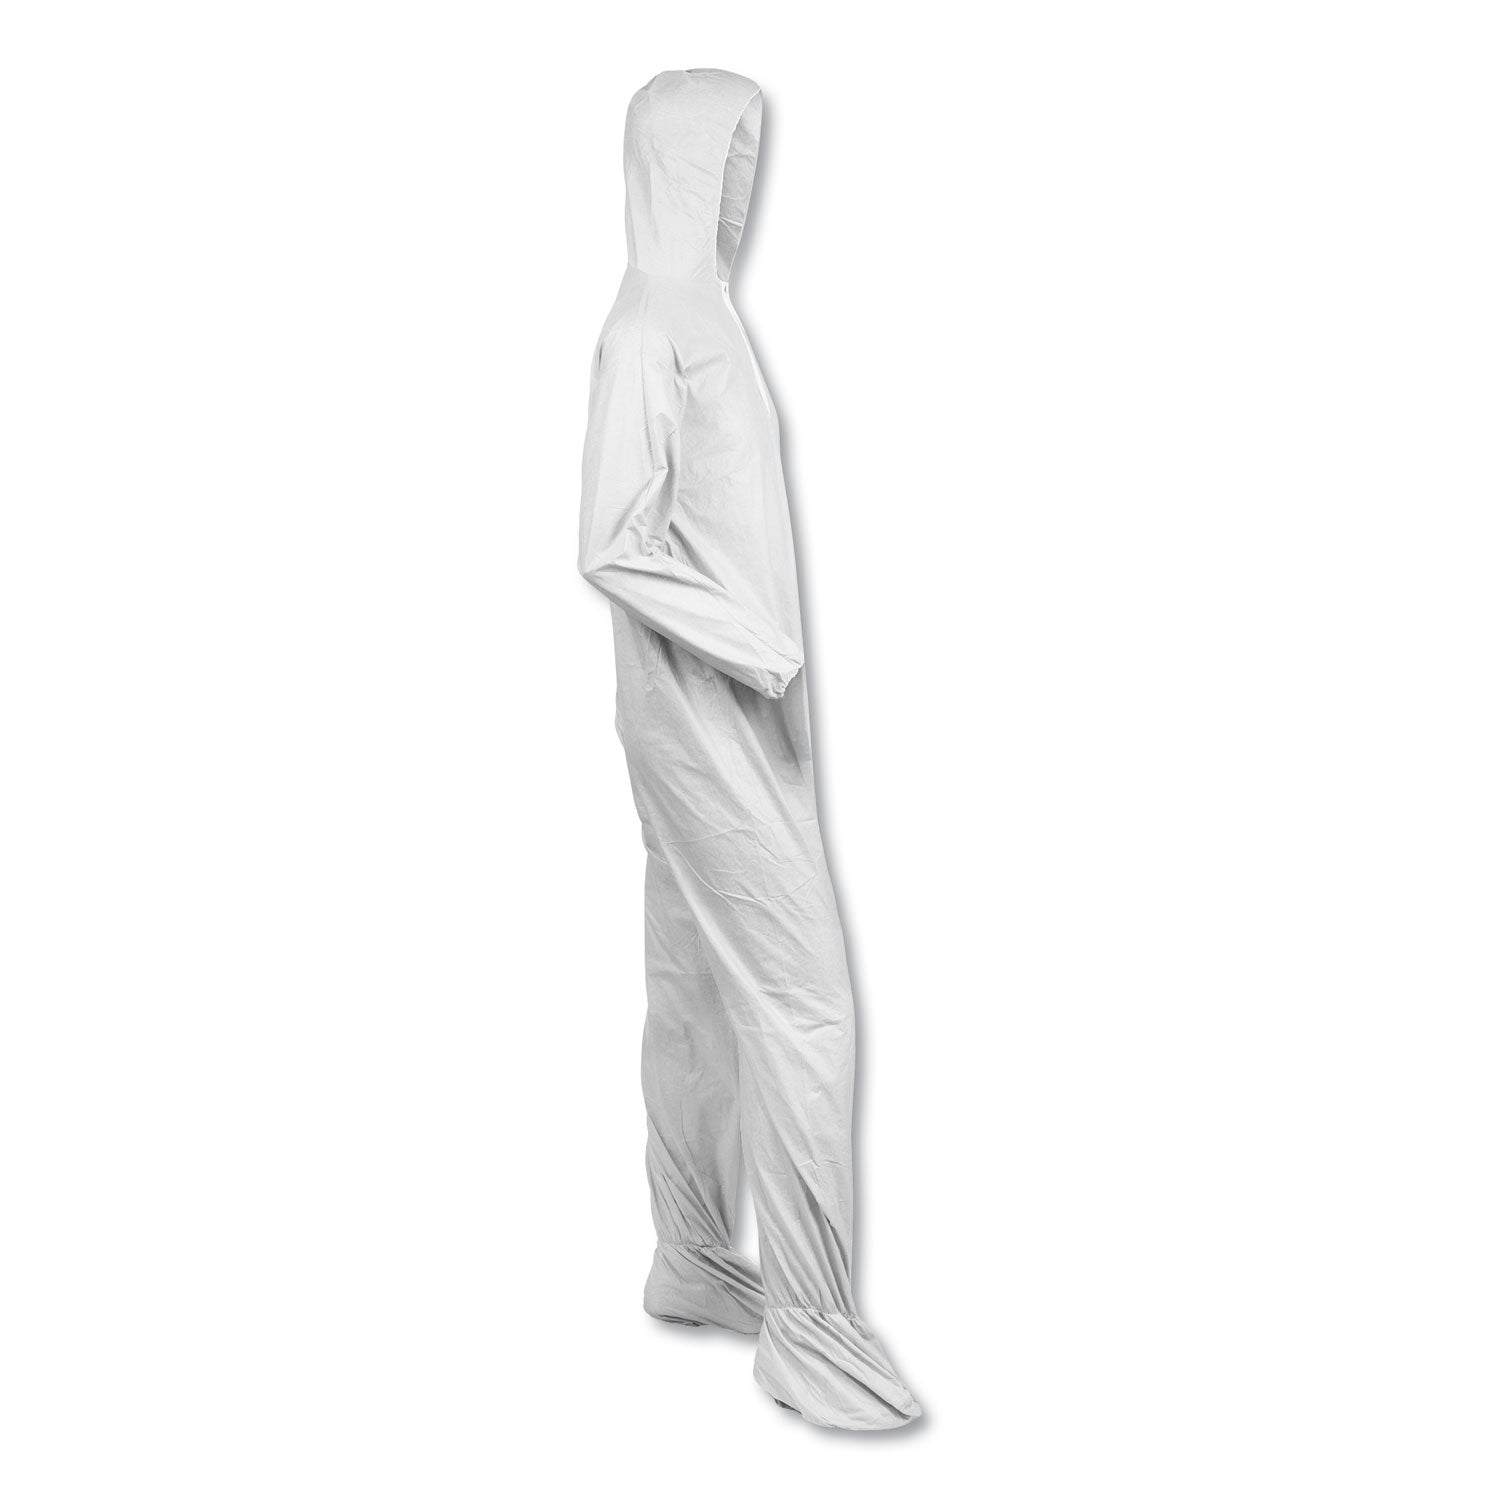 A40 Elastic-Cuff, Ankle, Hood and Boot Coveralls, Large, White, 25/Carton - 